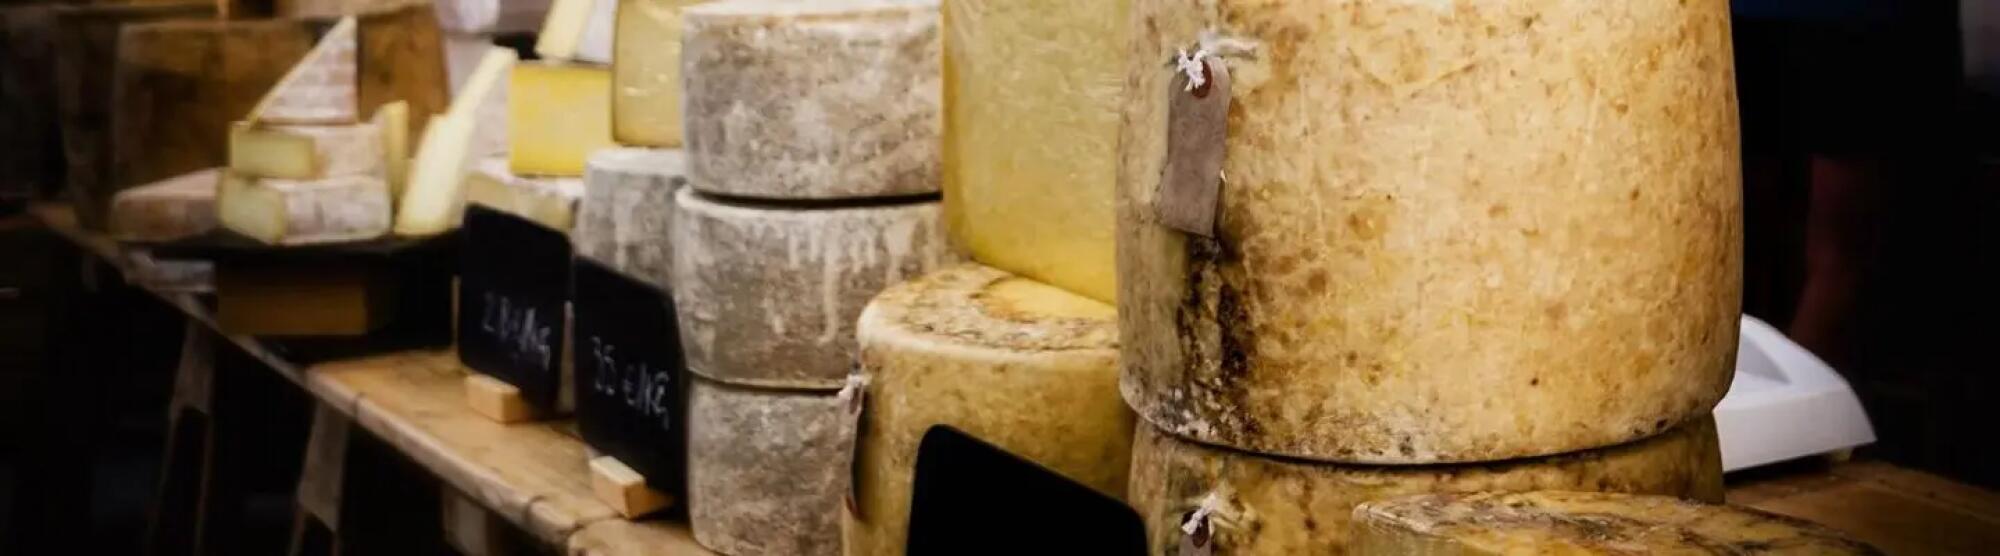 LA02_fromagerie chambery